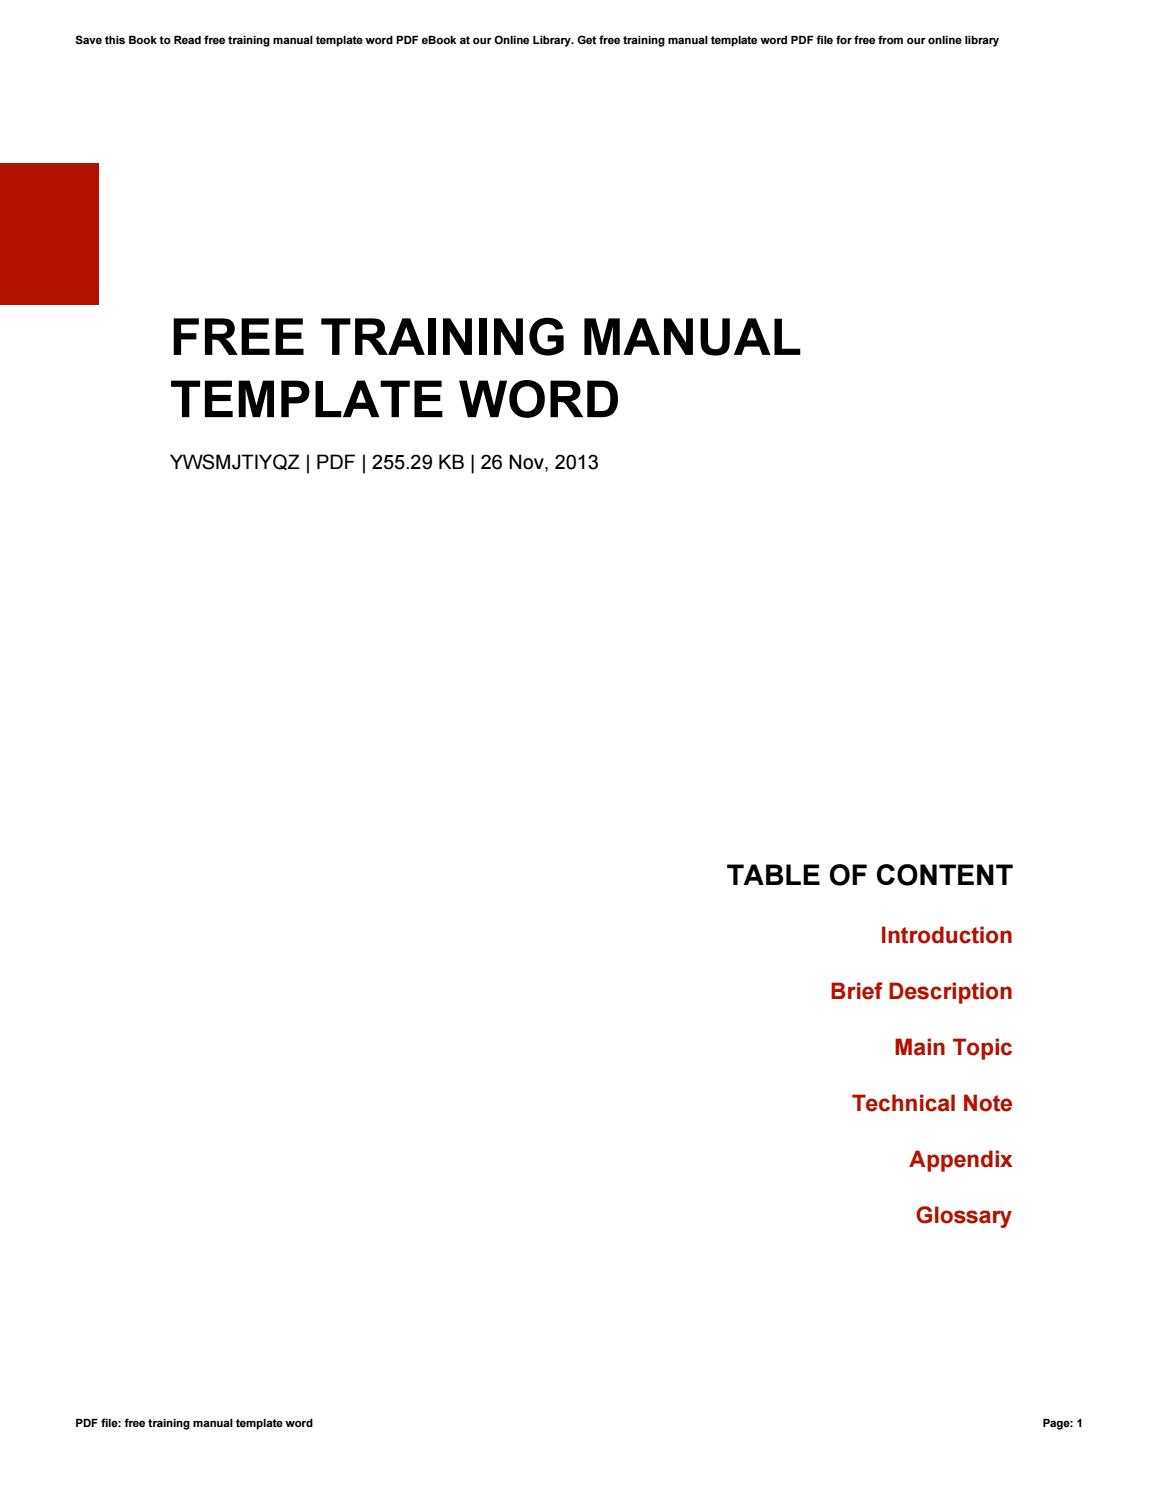 003 Training Manual Template Word Ideas Page 1 Fascinating Regarding Training Manual Template Microsoft Word